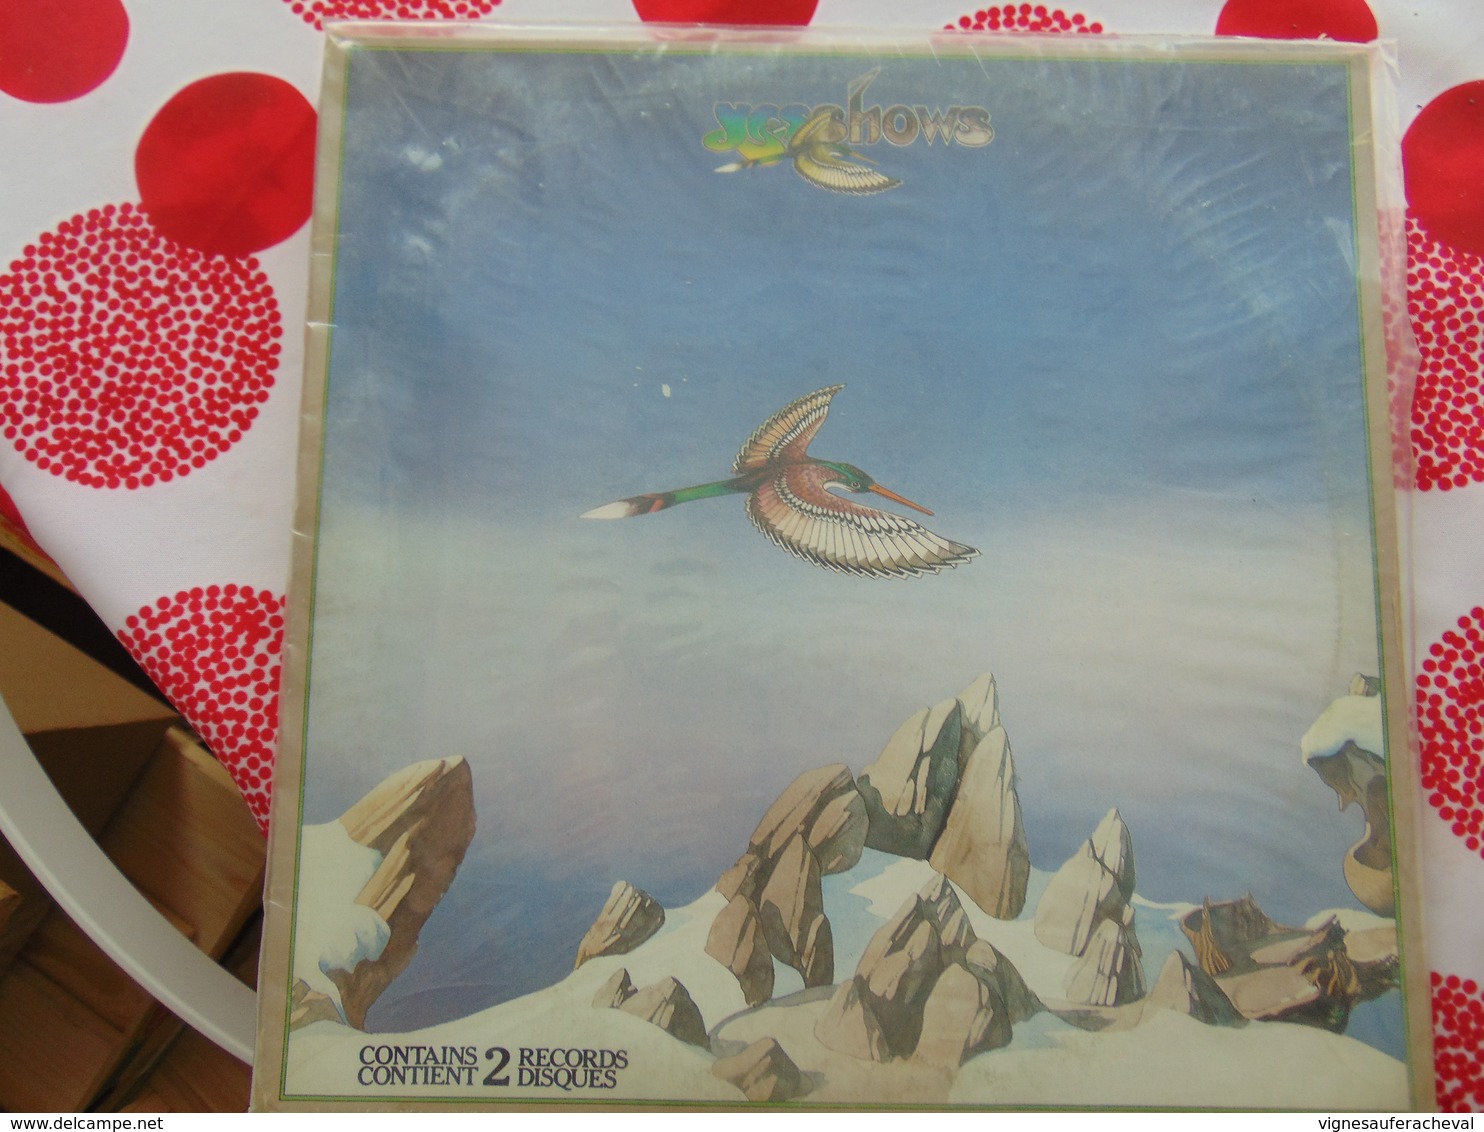 Yes- Yesshows (2 LP) - Rock